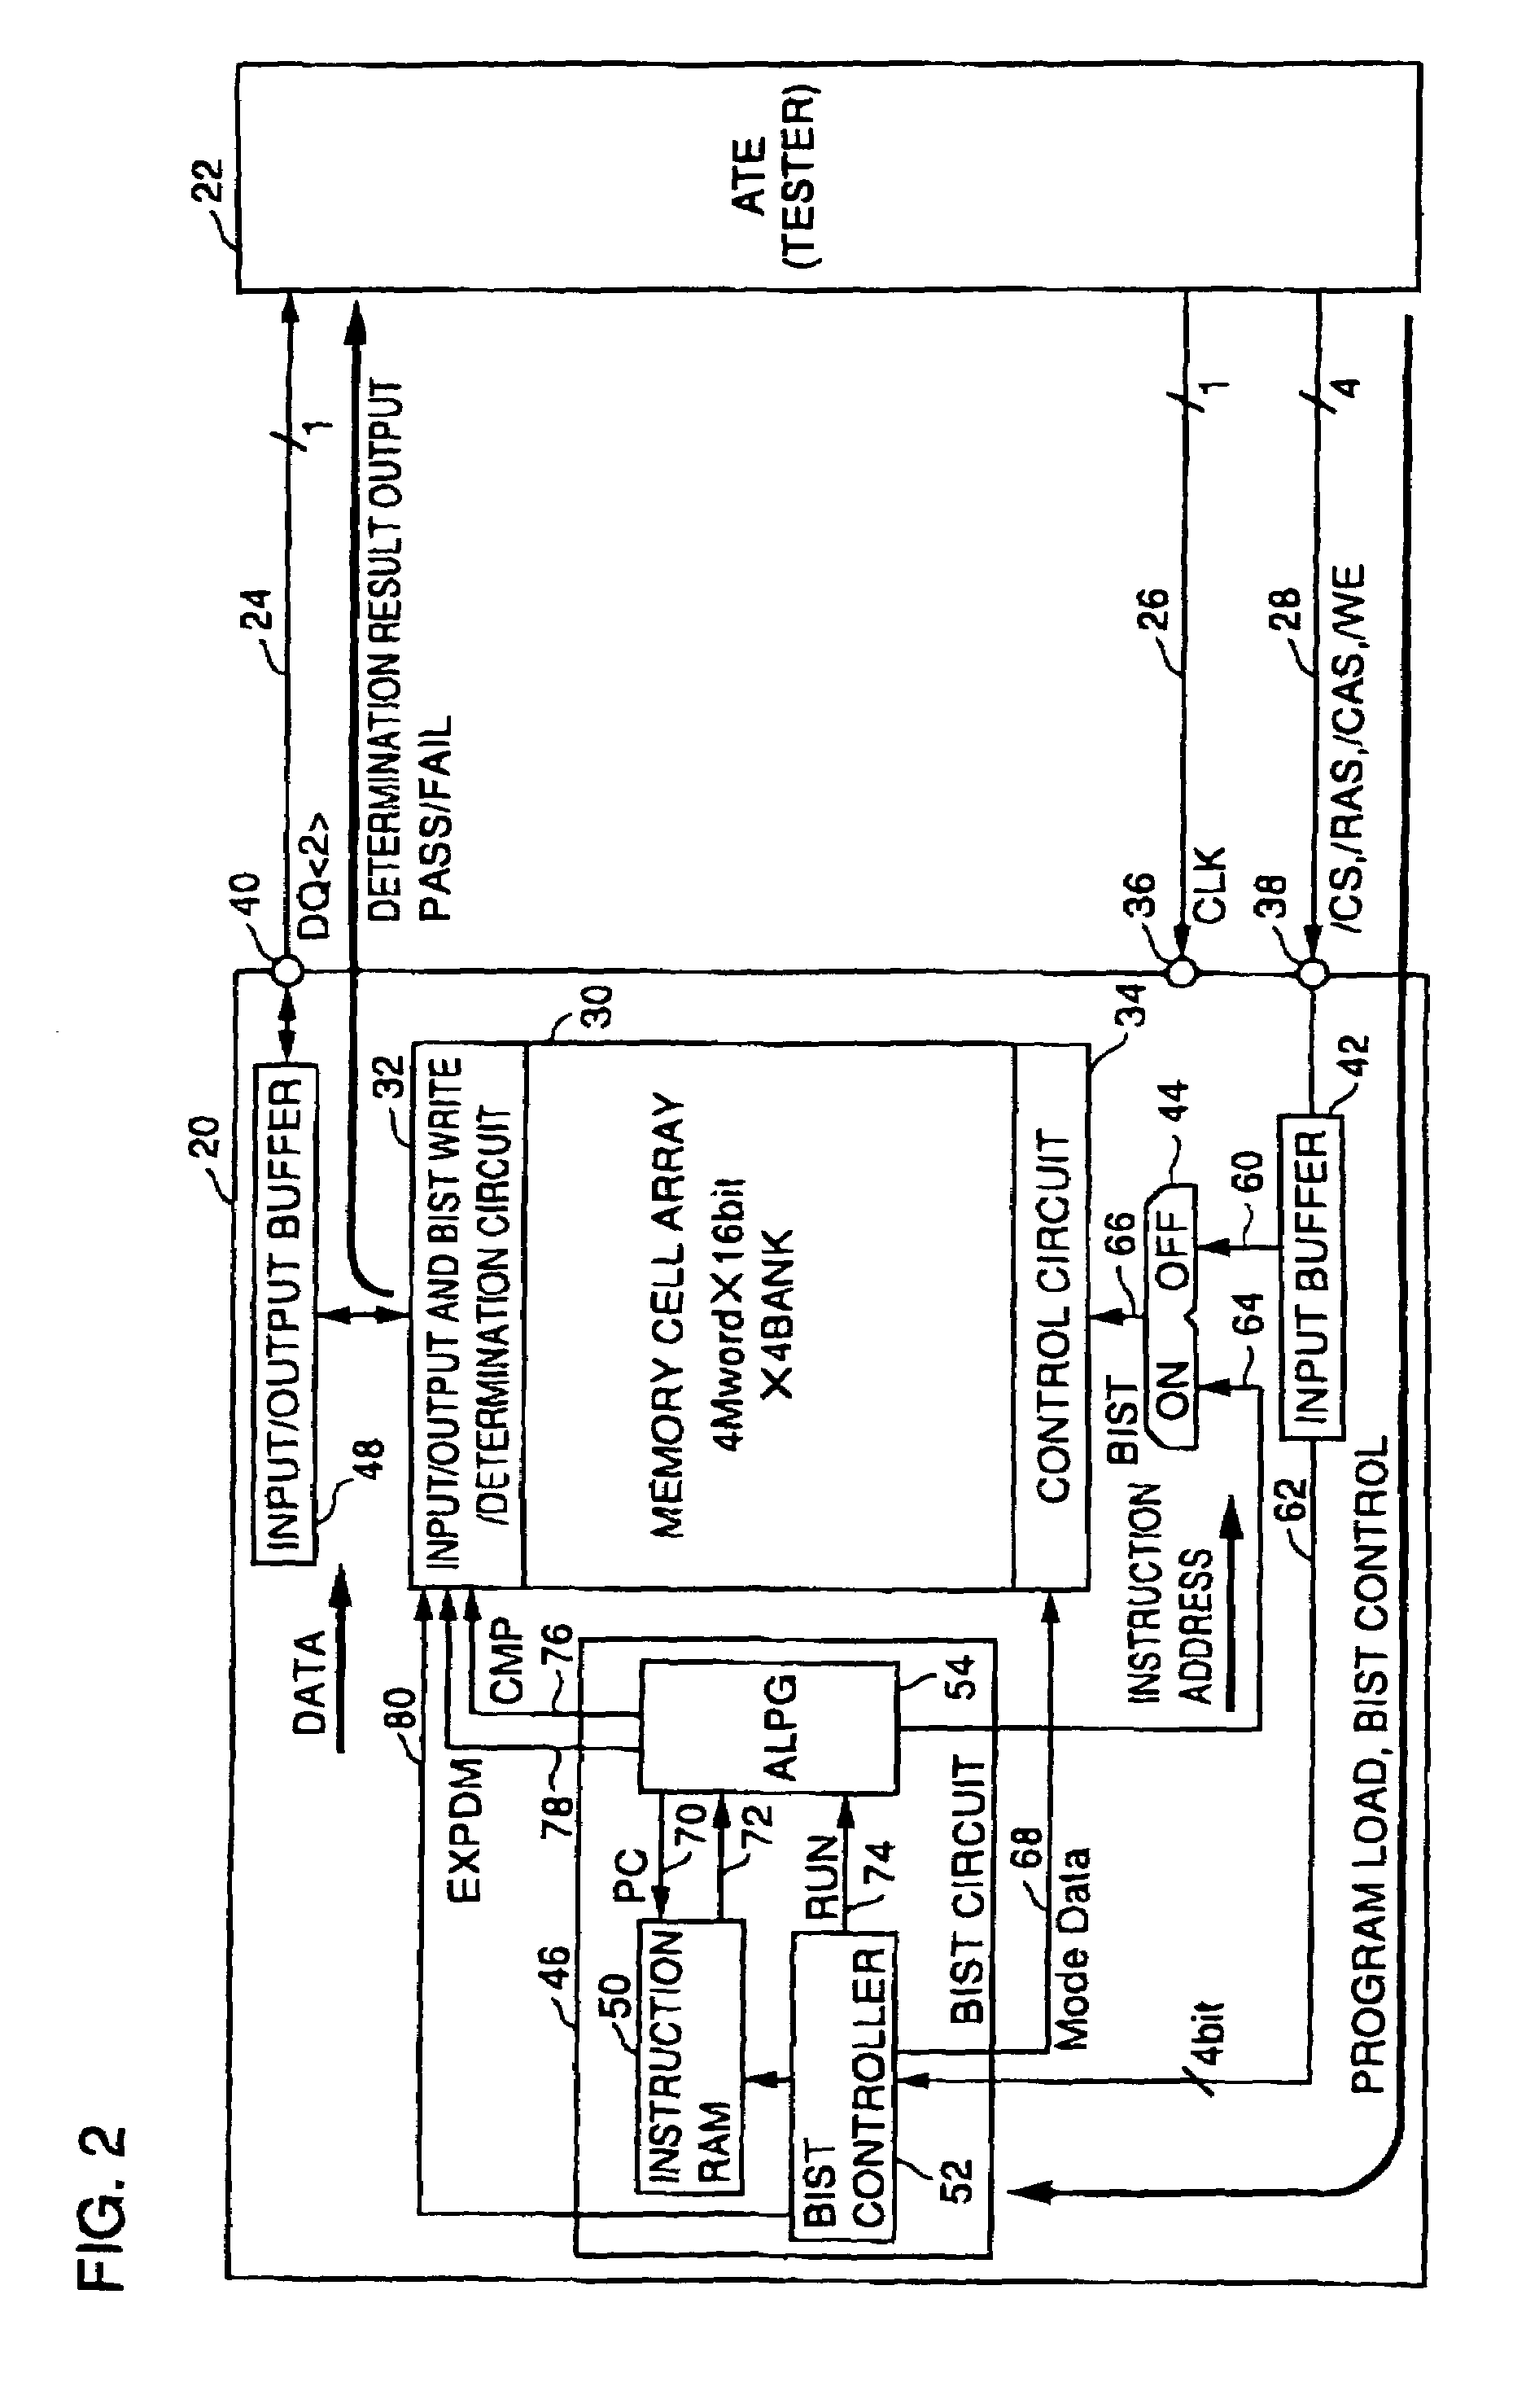 Semiconductor memory device with built-in self test circuit operating at high rate